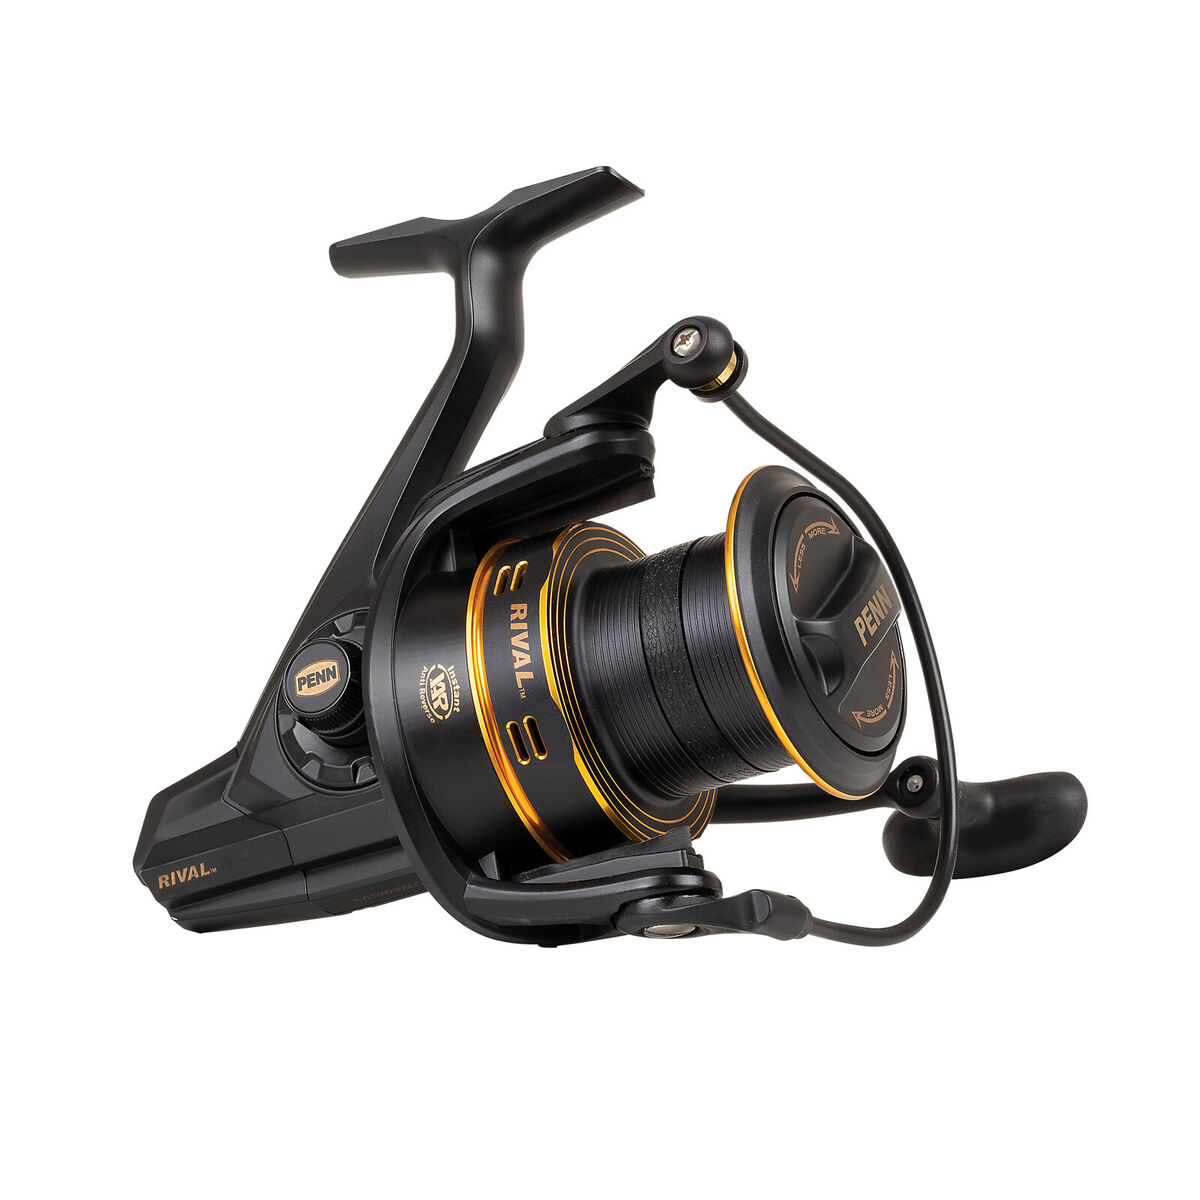 Penn Rival Long Cast Gold New Beach/Carp Fishing Reel All Sizes Available